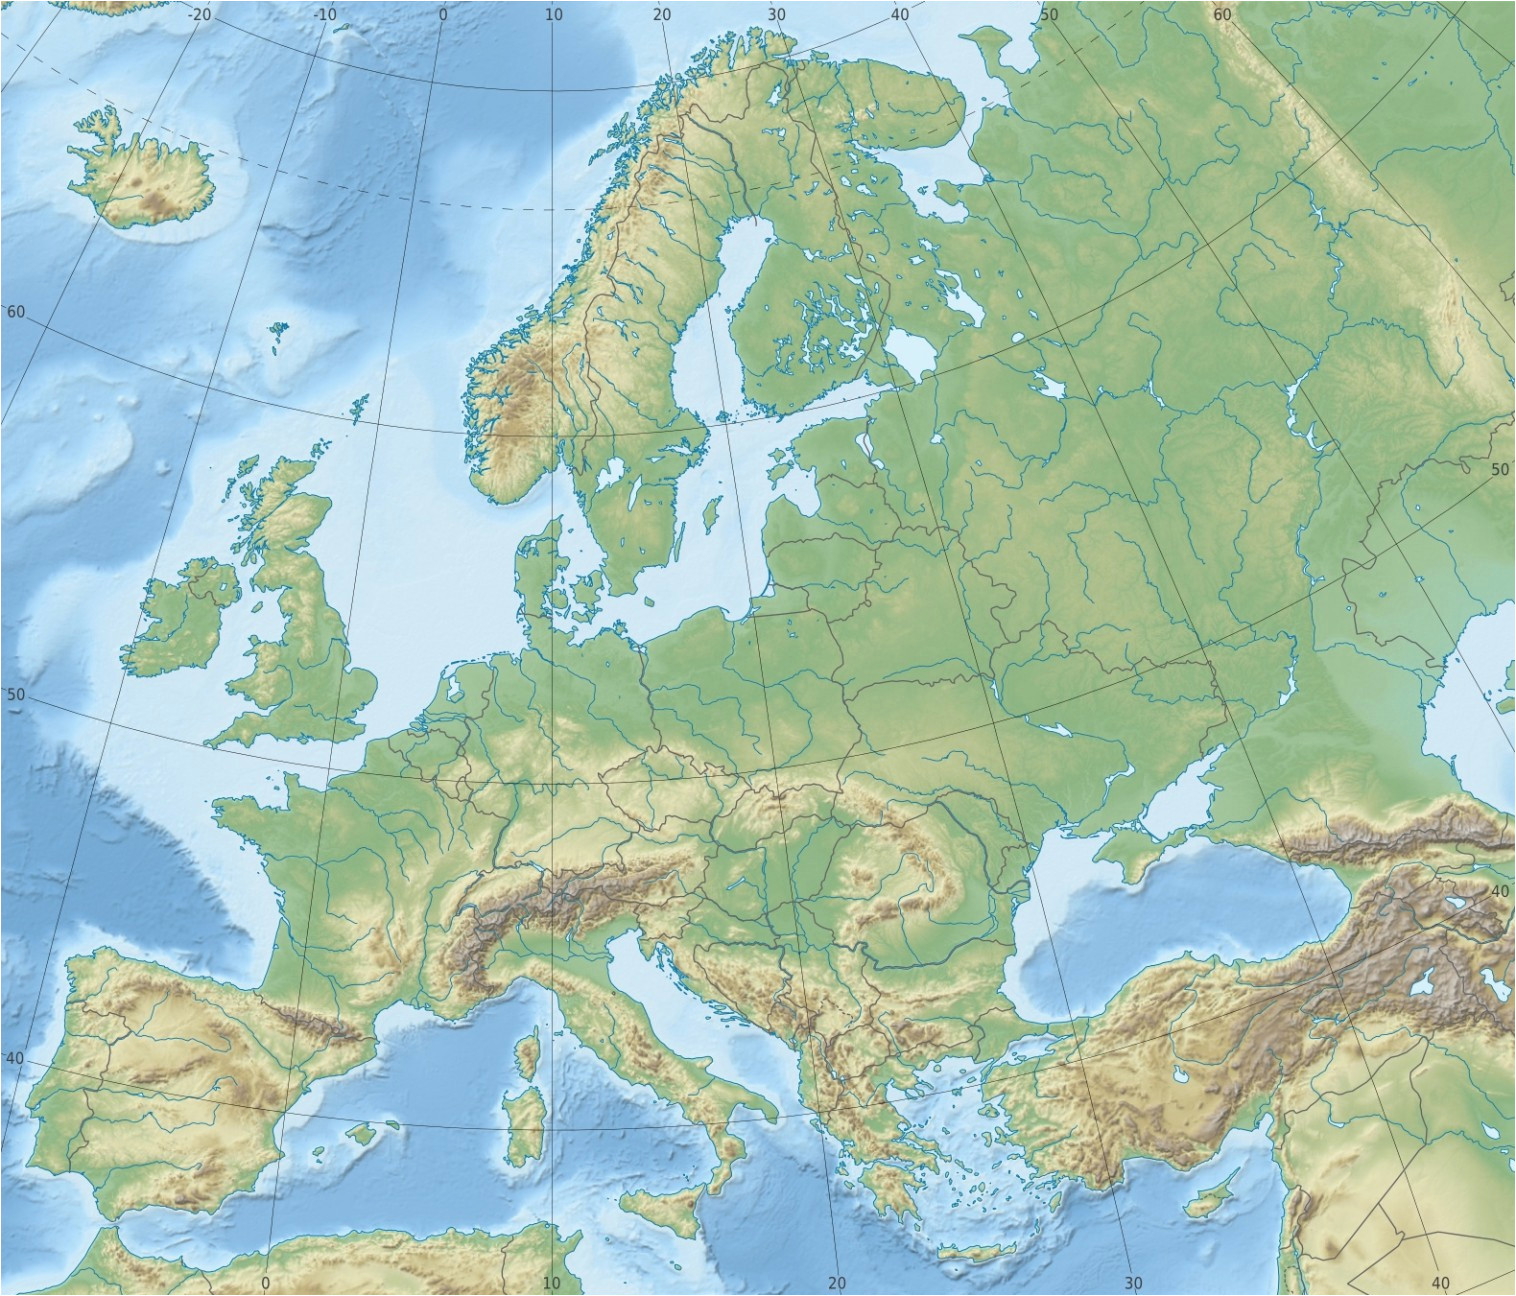 Topographic Map Of Europe Europe topographic Map Climatejourney org